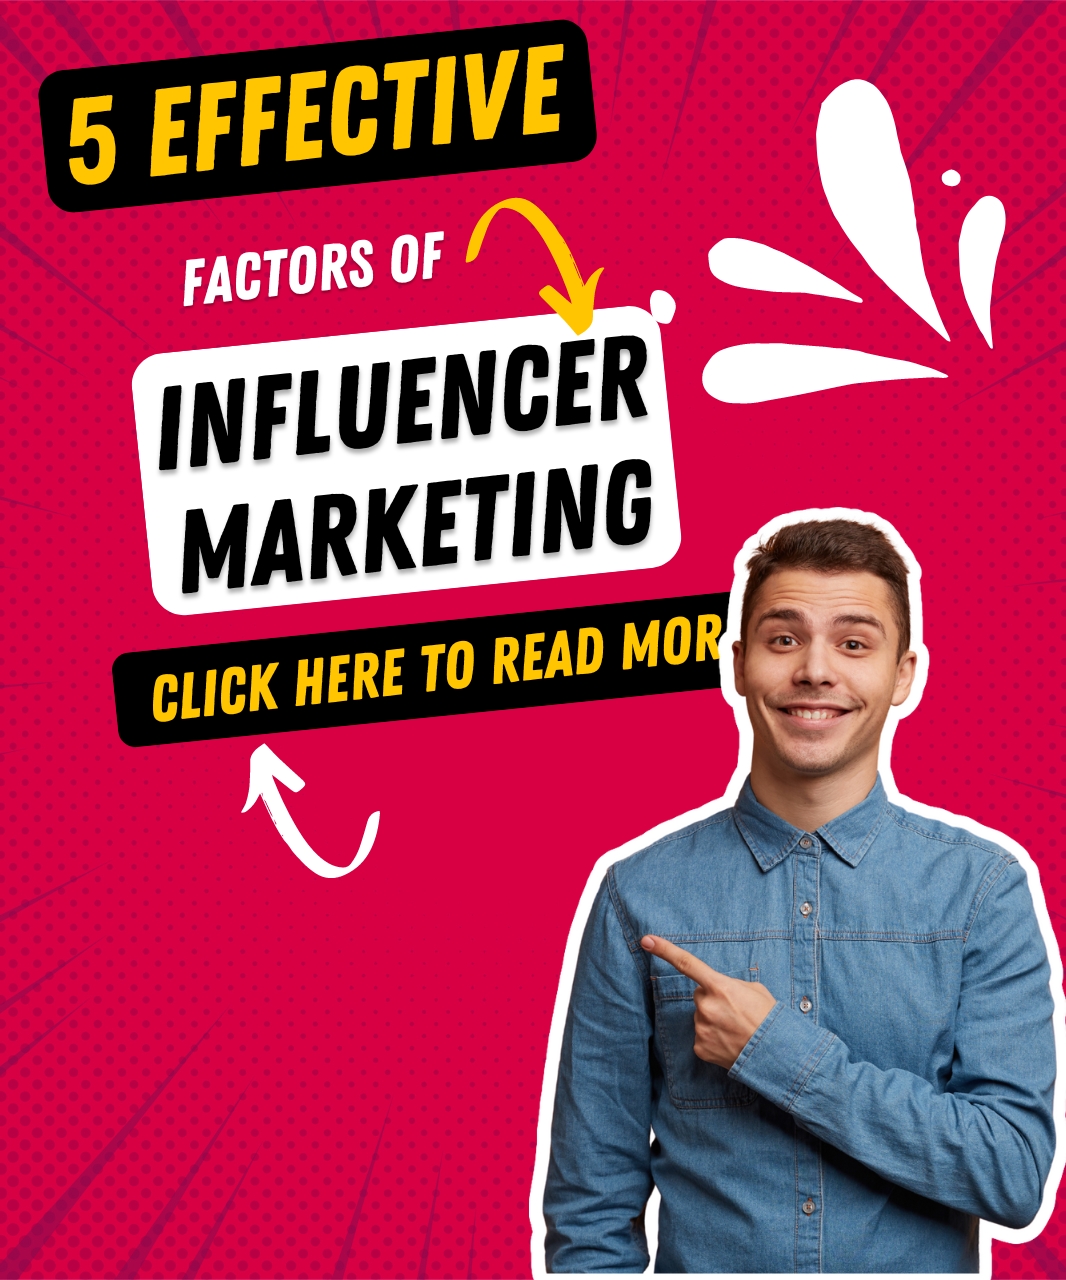 5 Effective Factors of Influencer Marketing in the Hospitality Industry